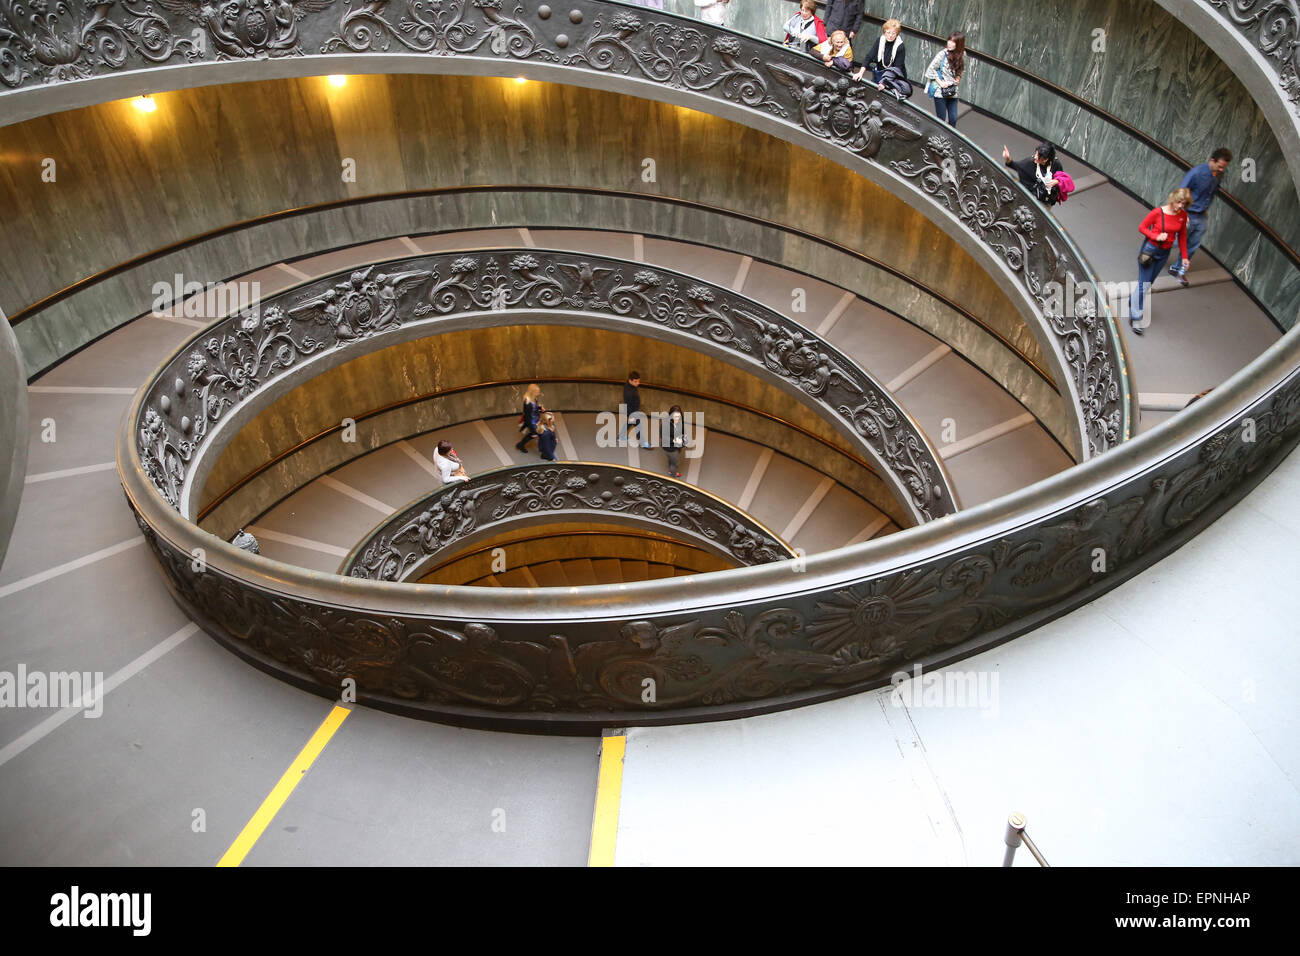 Bramante Staircase. Vatican Museums. Designed by Giuseppe Momo, 1932, inspired by spiral staircase designed by Bramante Stock Photo